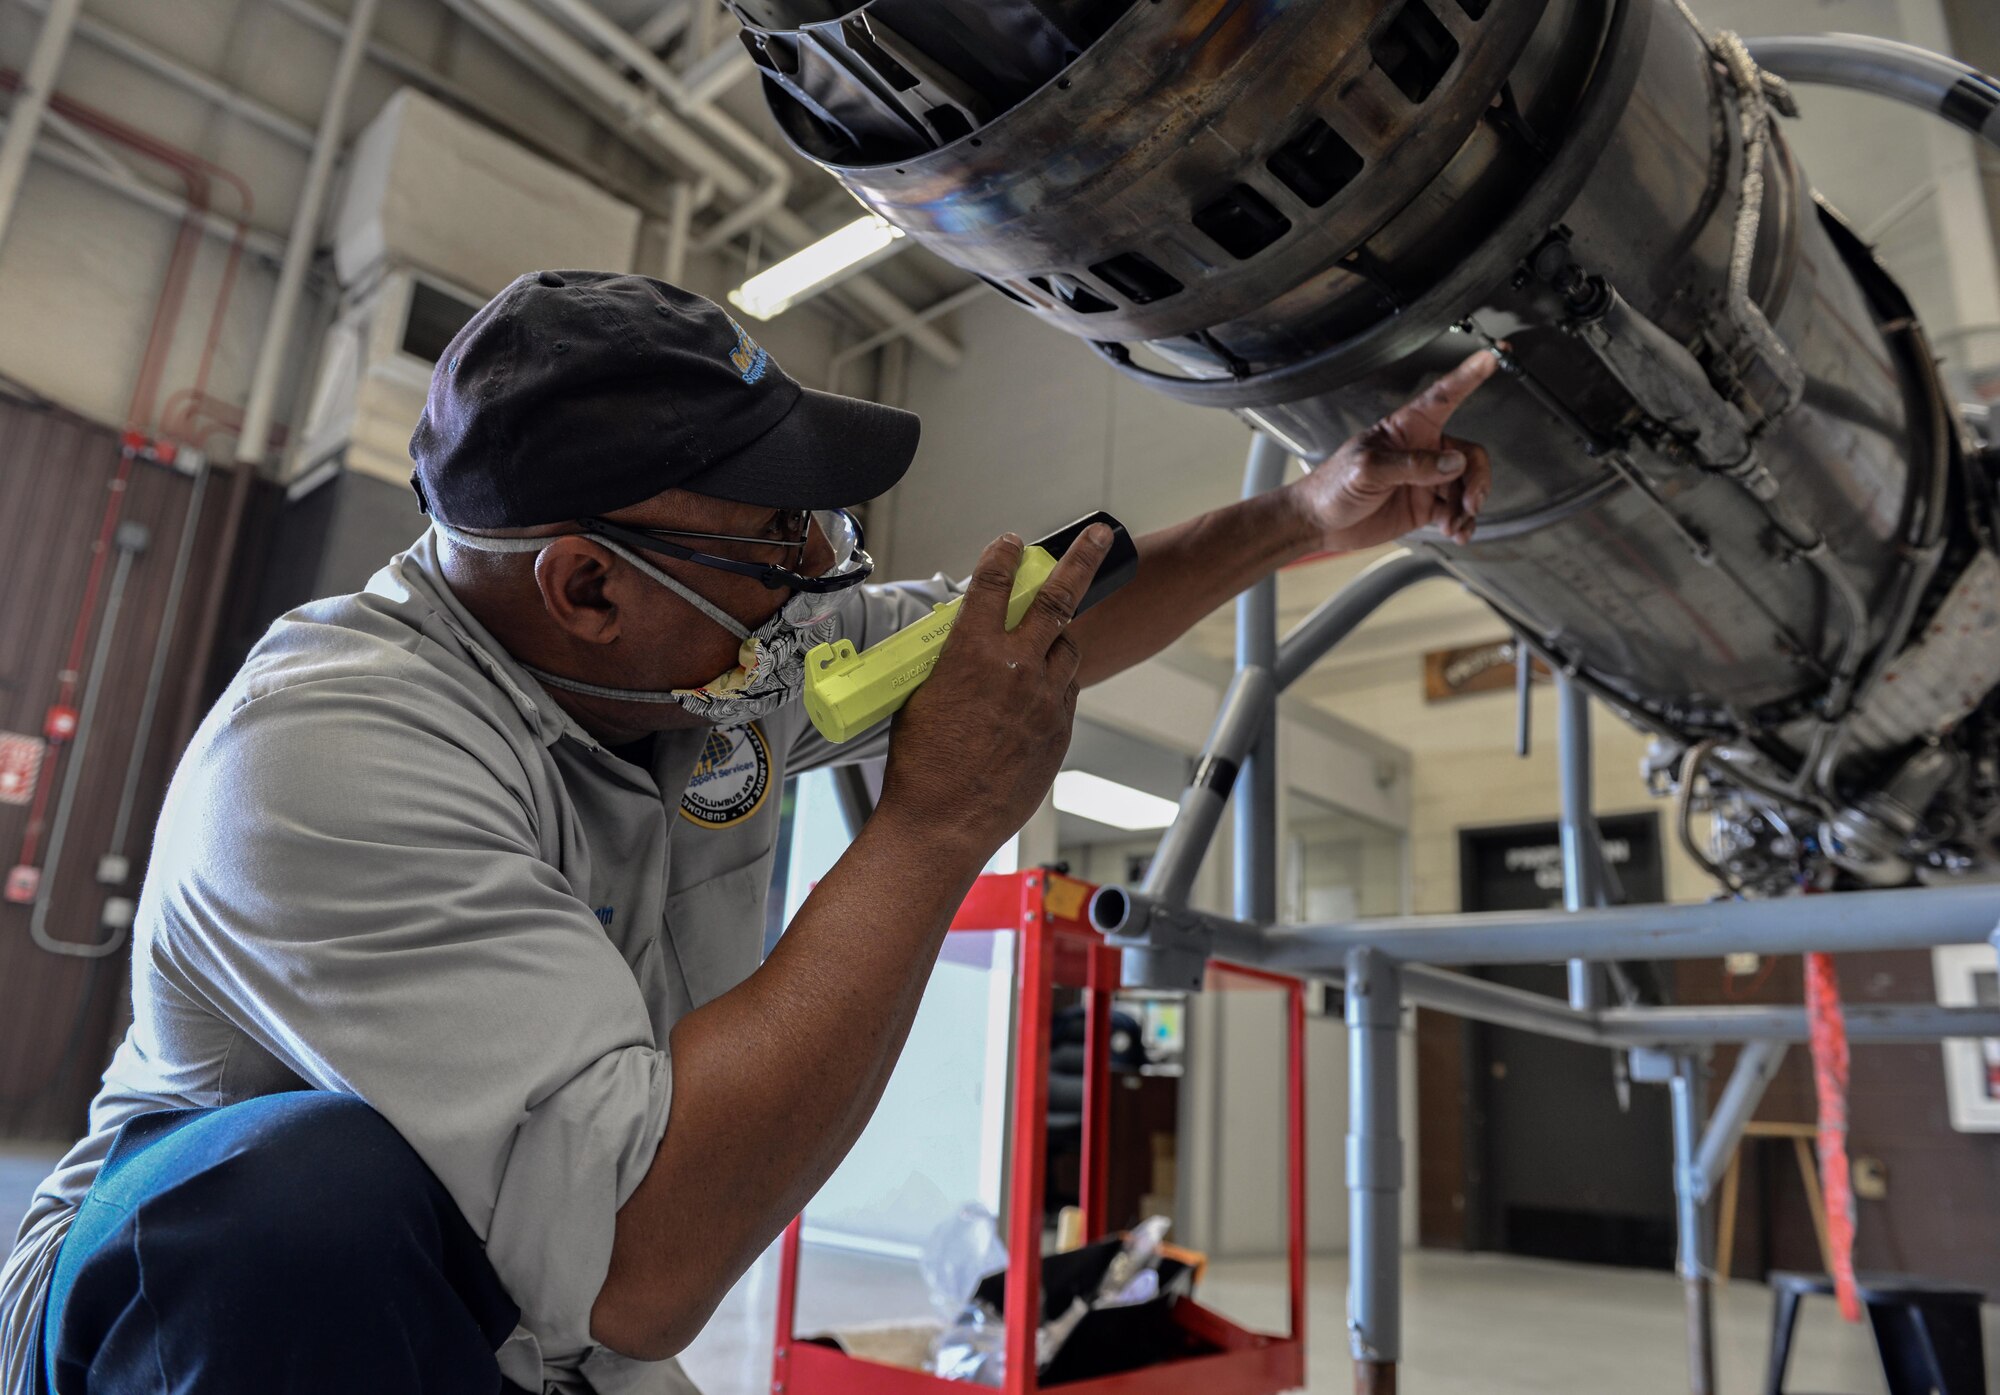 Willy Latham, M1 Support Services propulsion mechanic, inspects a General Electric J85-GE-5 turbojet engine April 17, 2020, at Columbus Air Force Base, Miss. On an aerospace vehicle, the propulsion system creates thrust by accelerating a gas, or "working fluid”. (U.S. Air Force photo by Airman 1st Class Davis Donaldson)